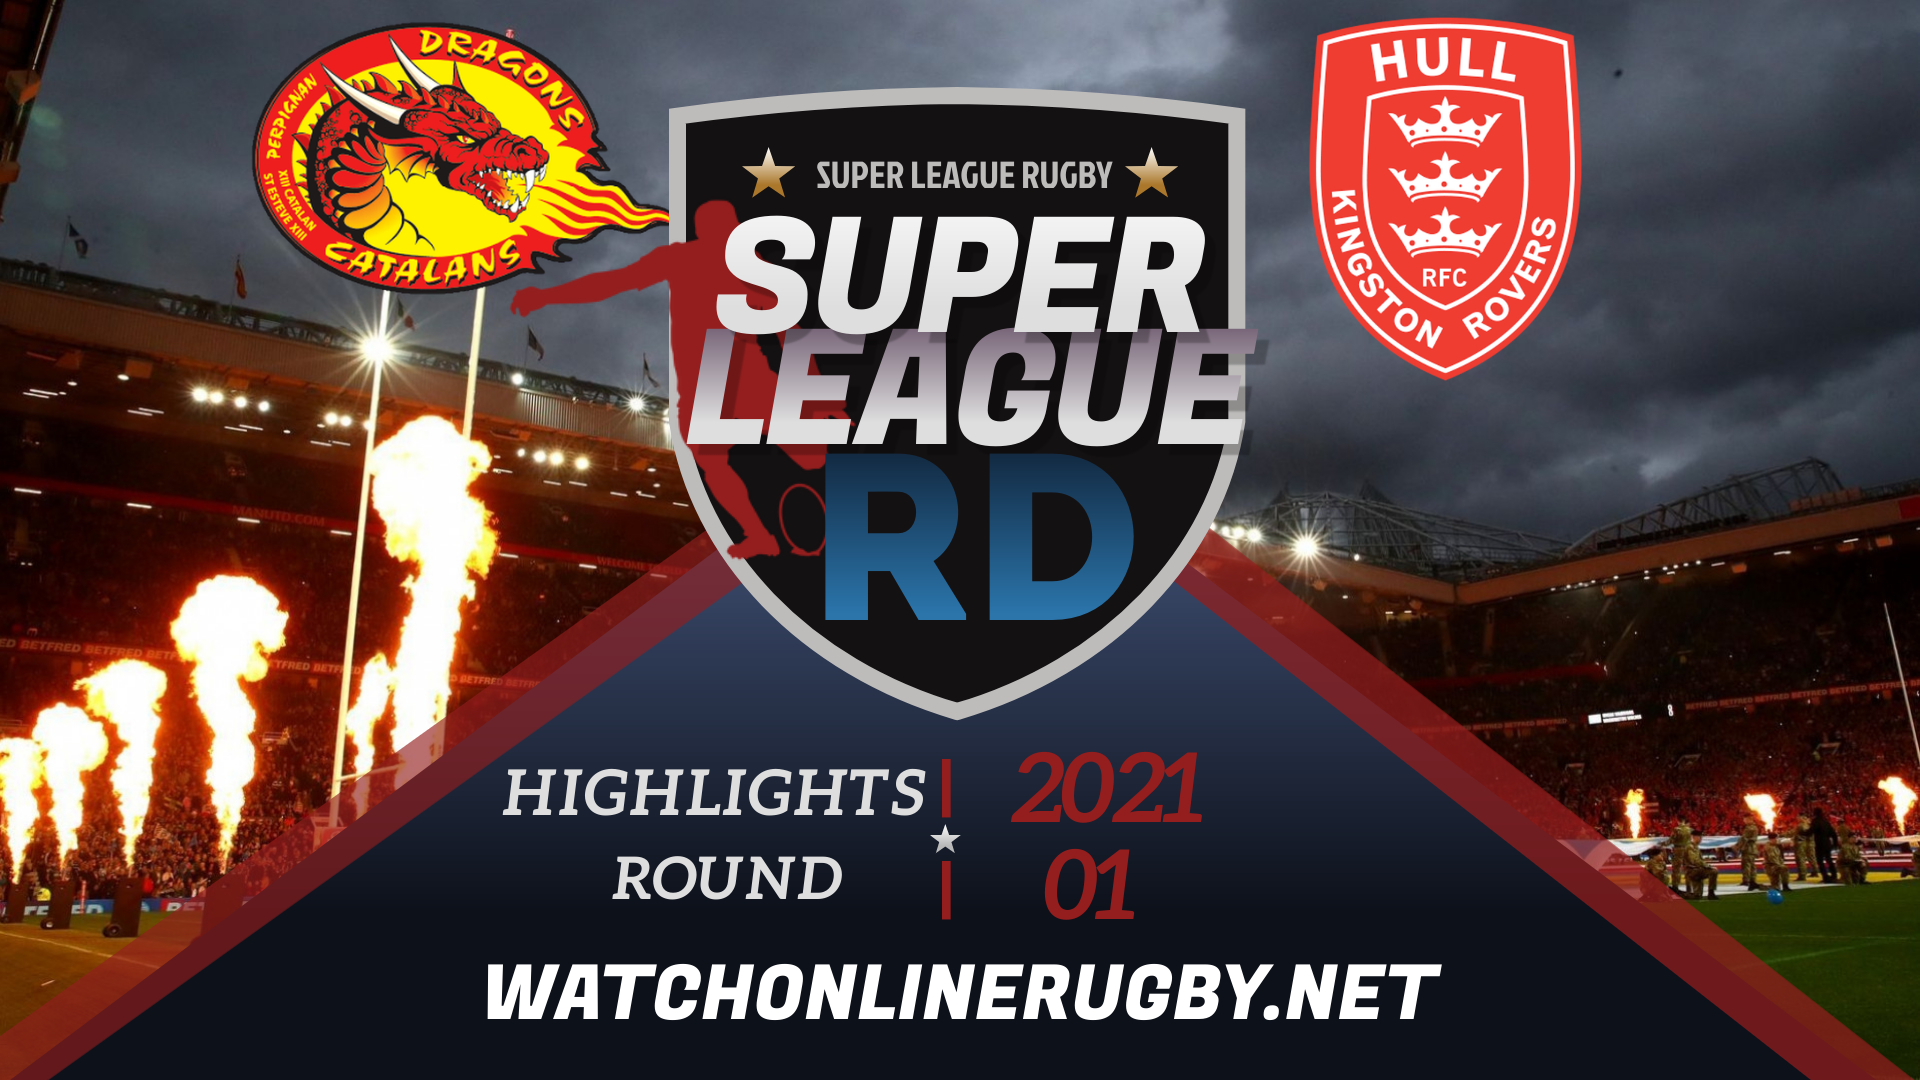 Catalans Dragons Vs Hull KR Super League Rugby 2021 RD 1